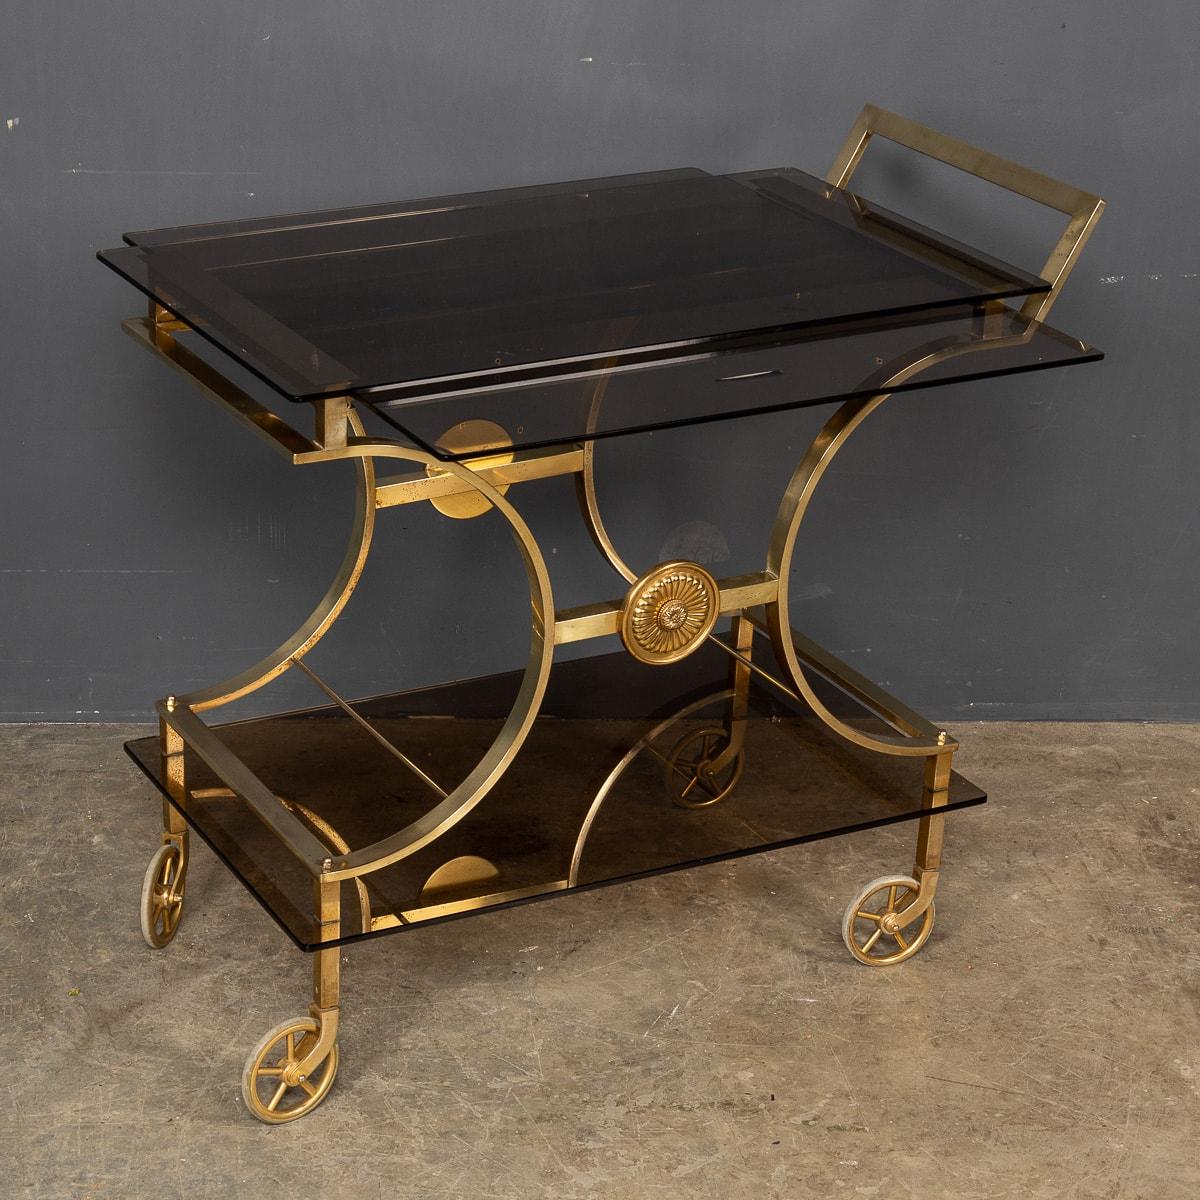 A mid 20th century French brass bar cart with retractable sliding serving trays set with smoked glass, by a renowned design house Maison Bagues.

CONDITION
In Great Condition - wear consistent with age.

SIZE
Height: 76cm
Width: 82cm
Depth: